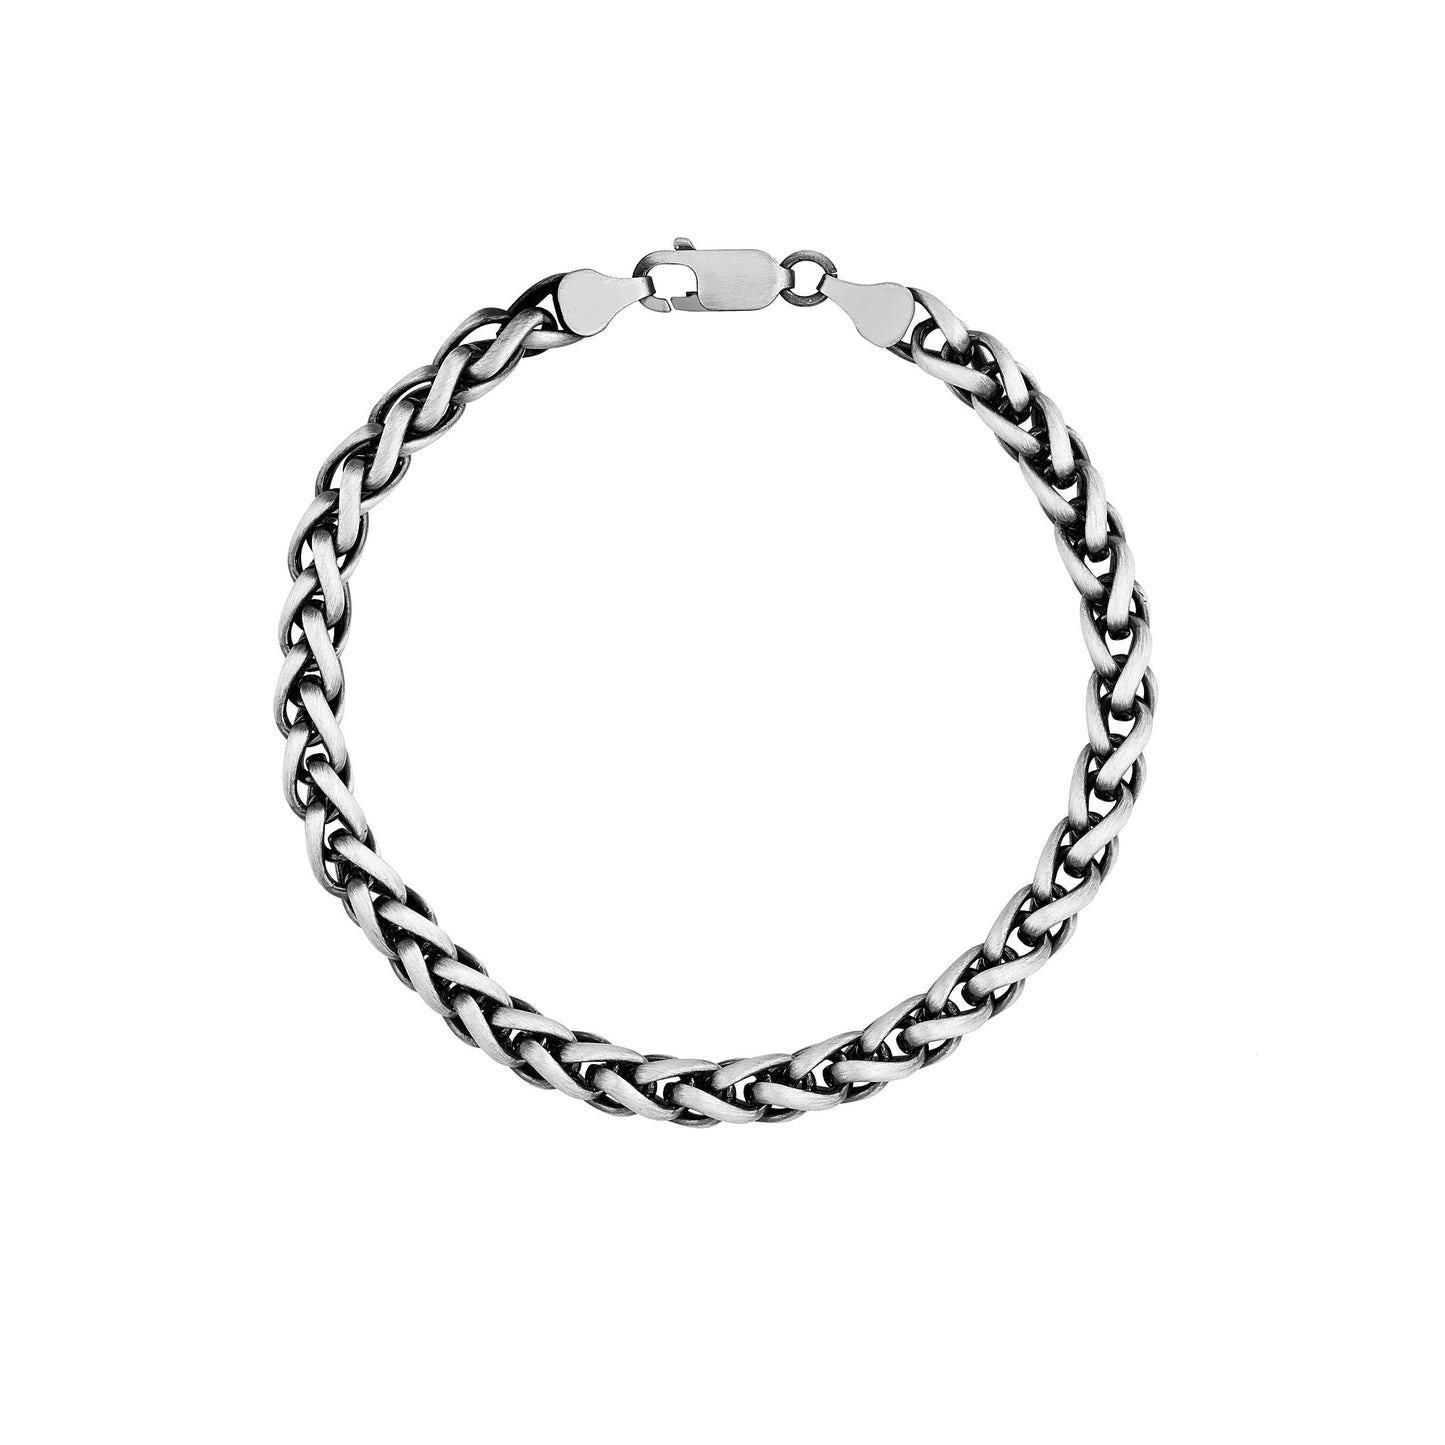 Oxidized Sterling Silver Round Wheat Chain Bracelet, 9 inches